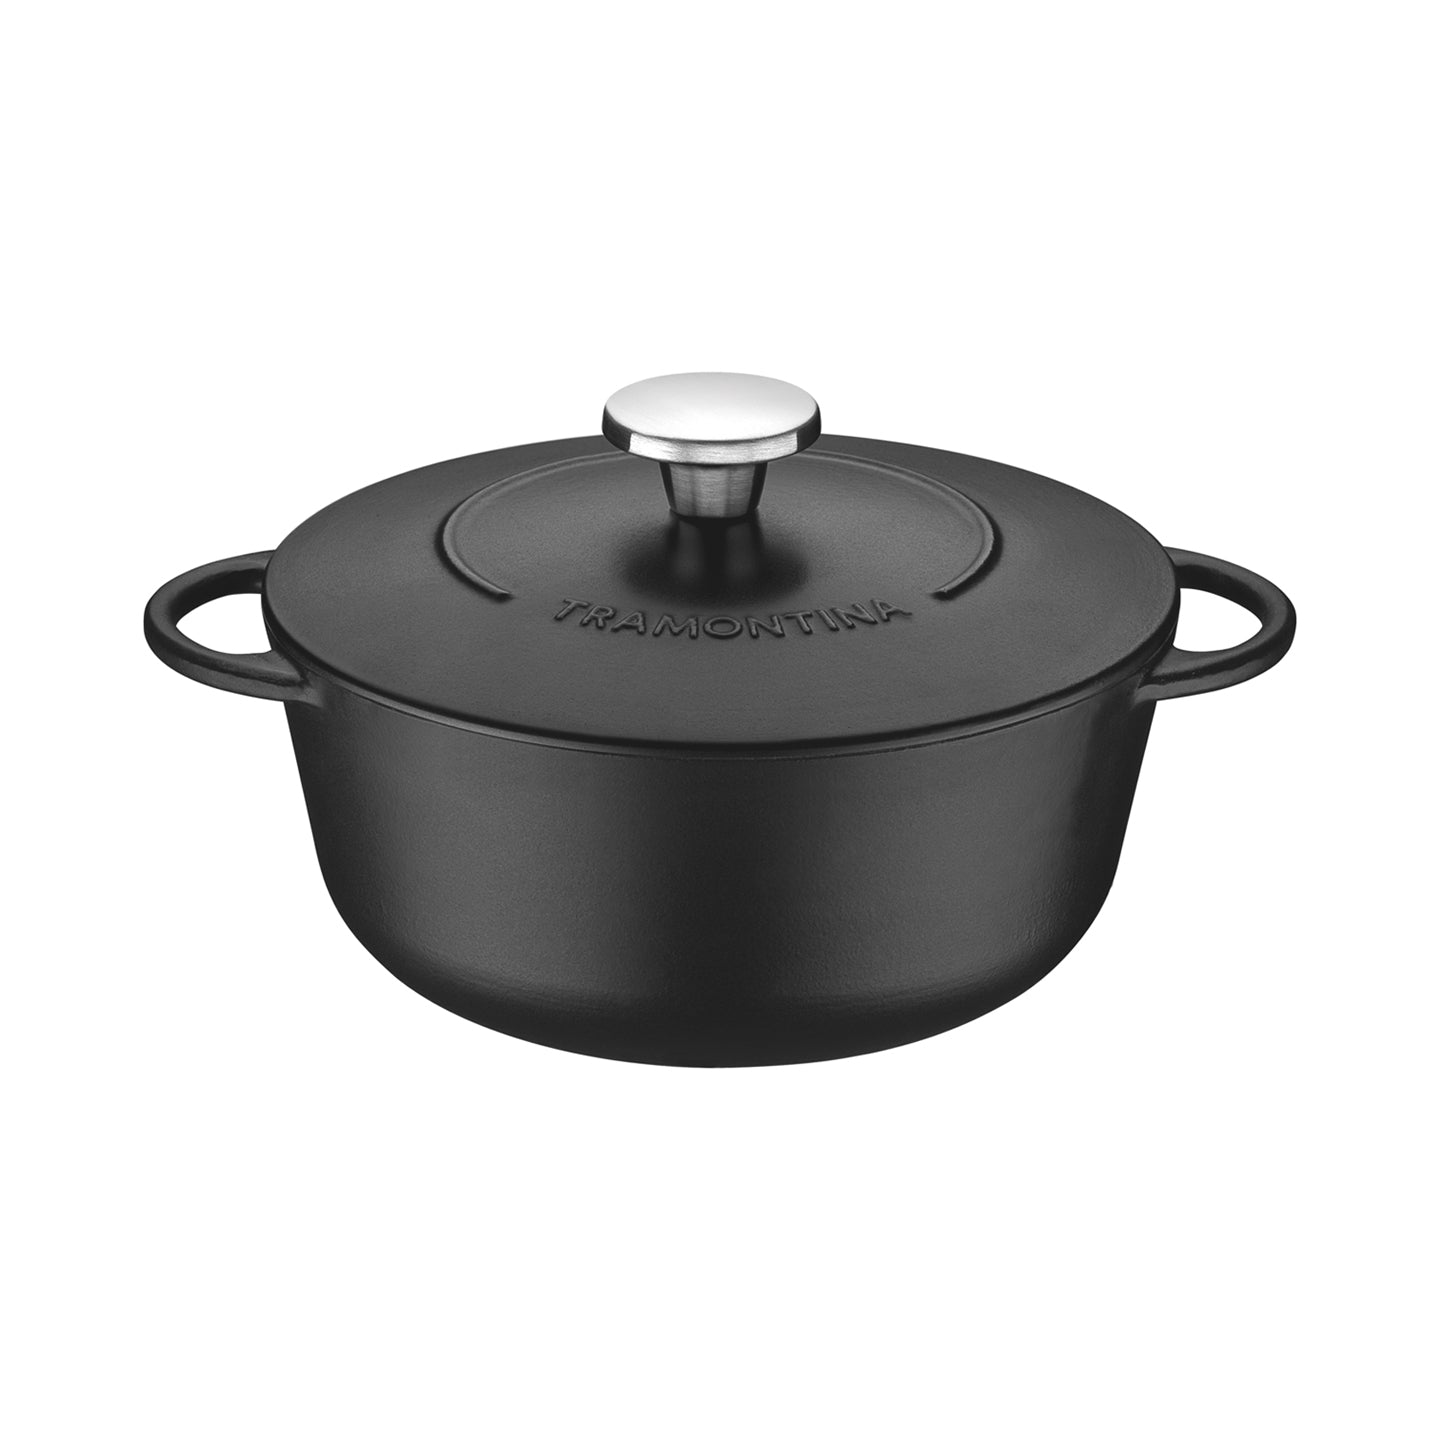 IronLite Shallow Casserole Dish for Hotels, Foodservice, Black